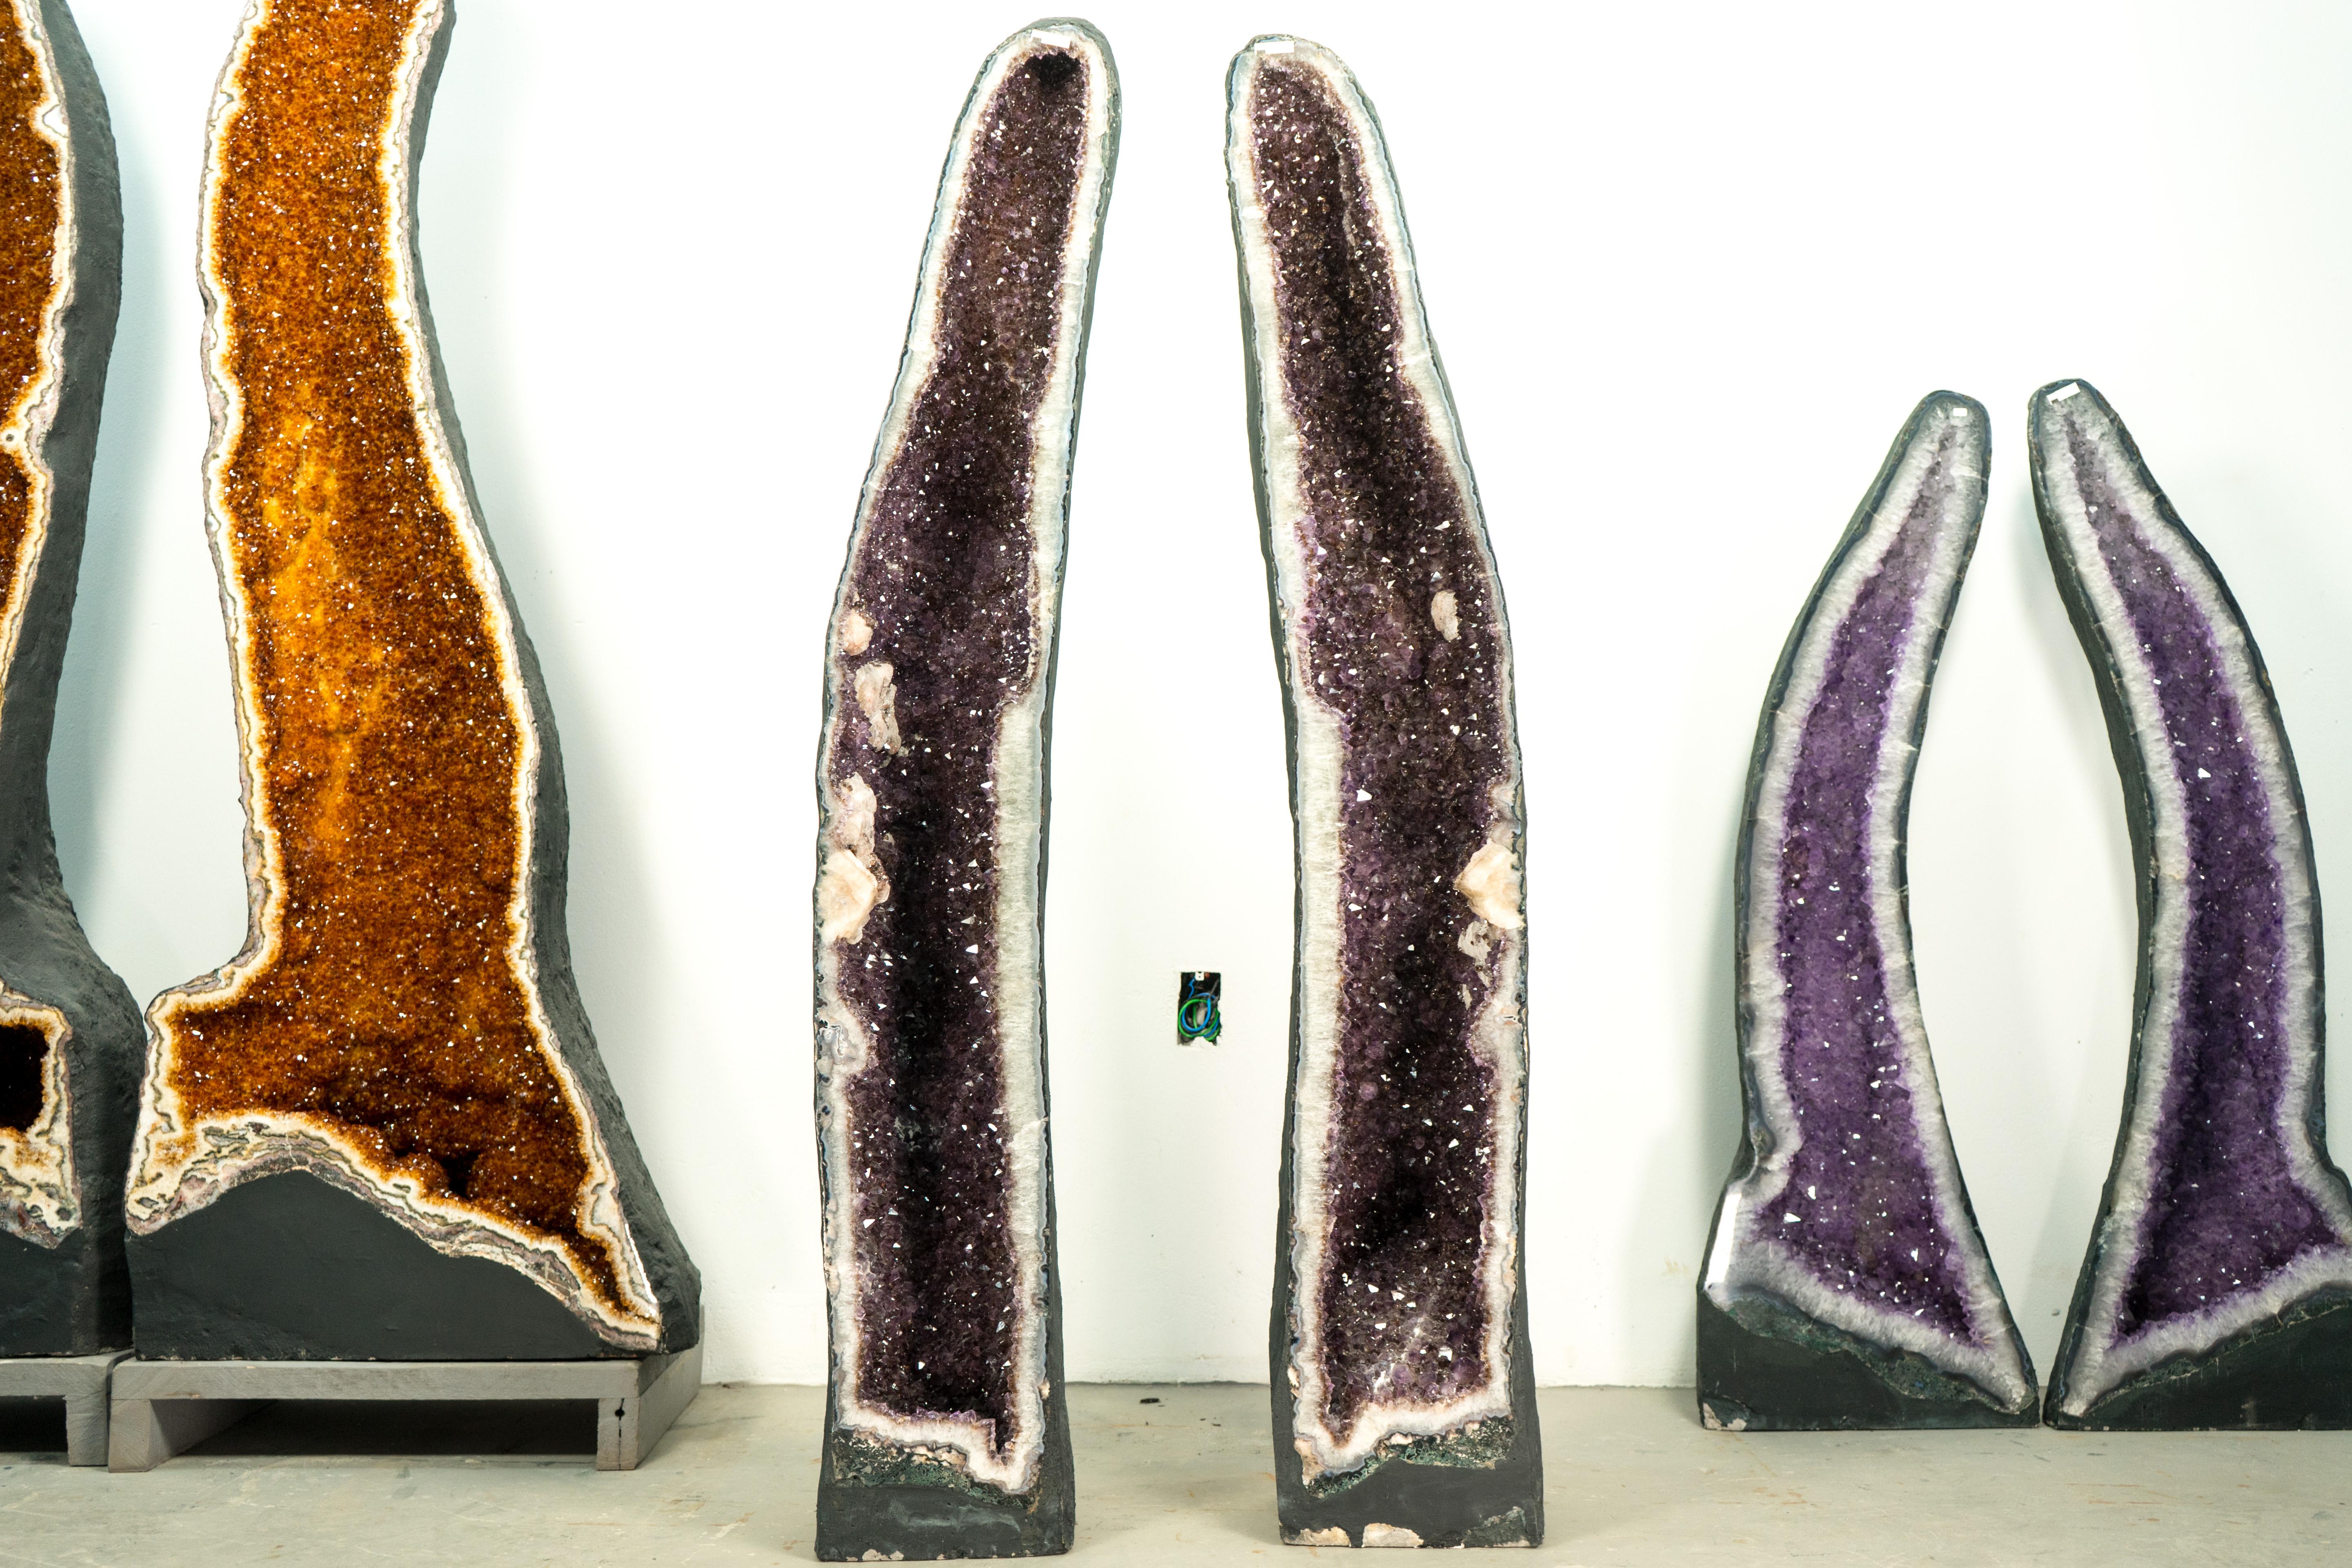 Pair of 5 Ft Tall Large Amethyst Geode Cathedrals with Sparkly Lavender Amethyst For Sale 8